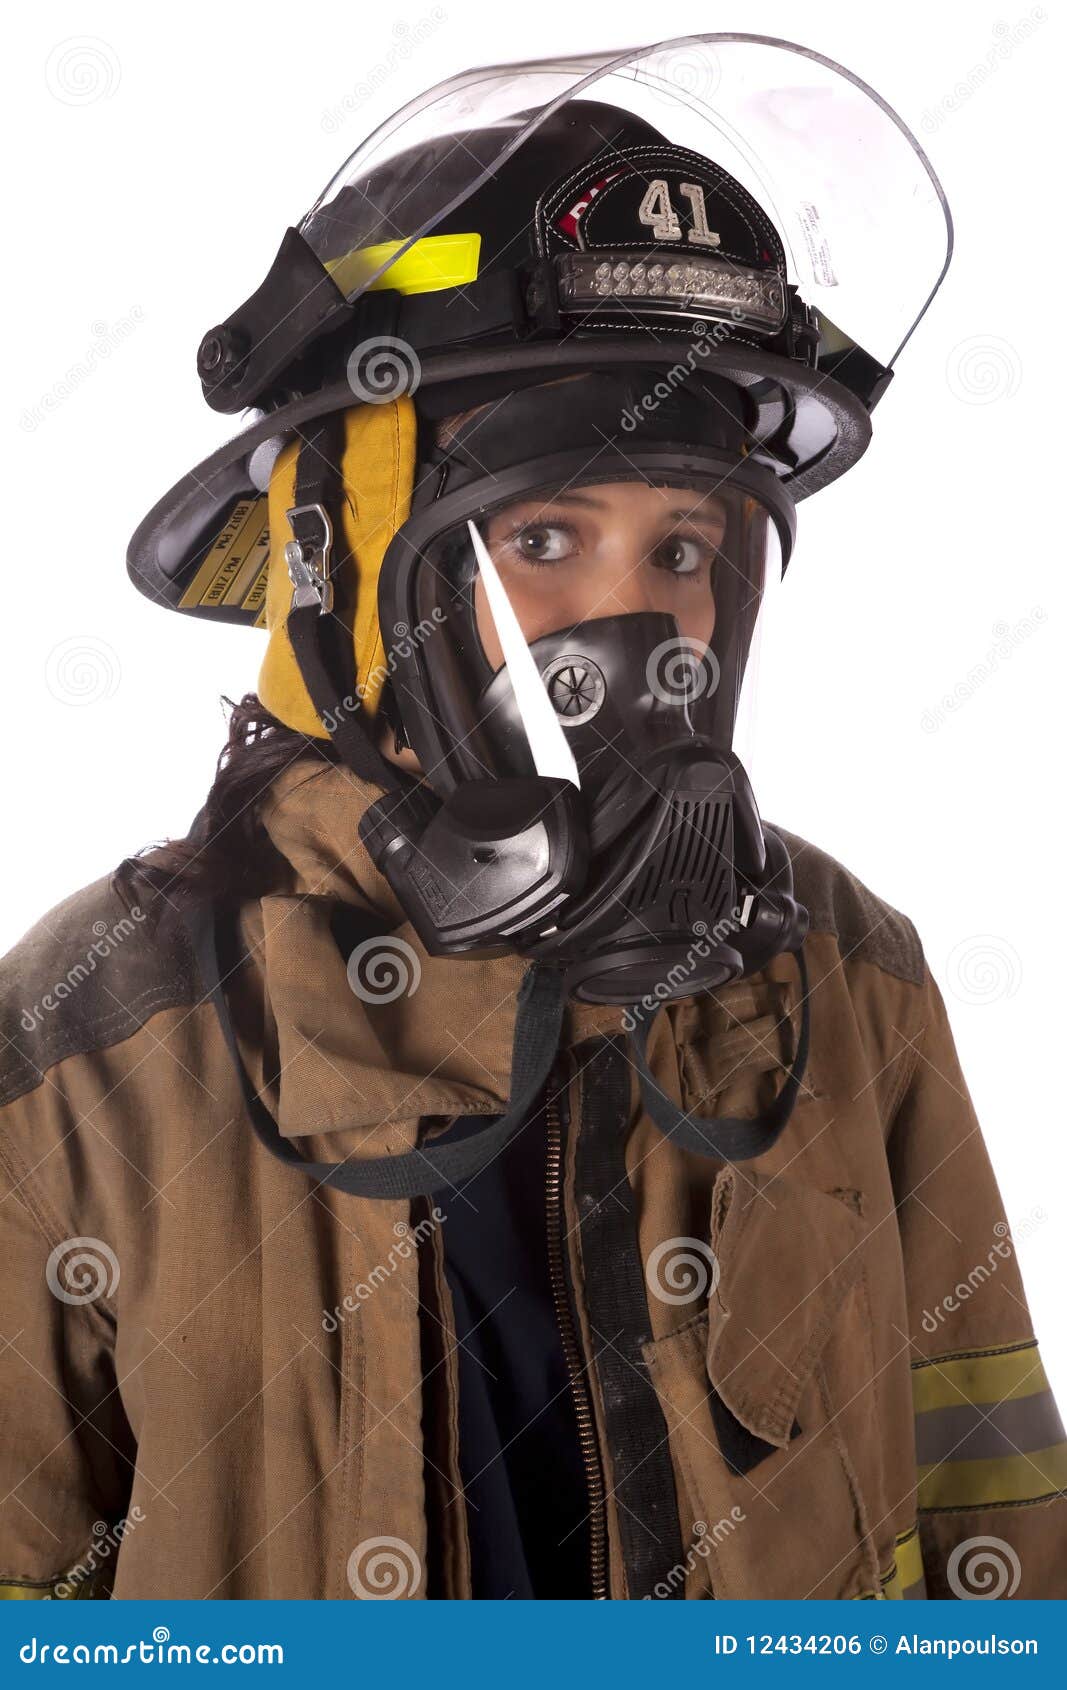 Mask stock photo. Image of color, station, firefighter - 12434206